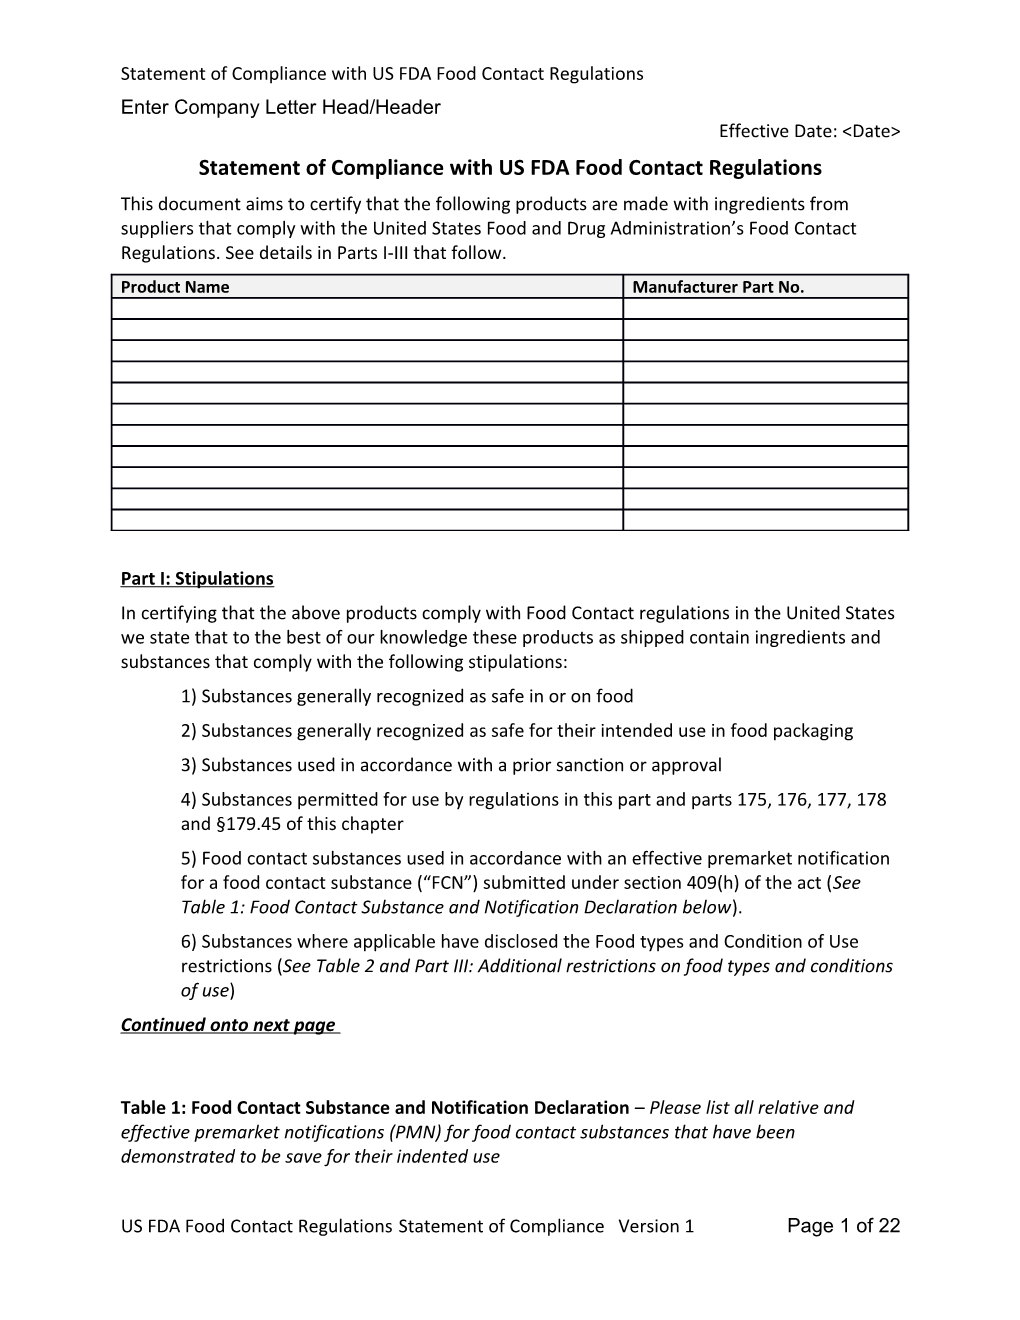 Statement of Compliance with US FDA Food Contact Regulations